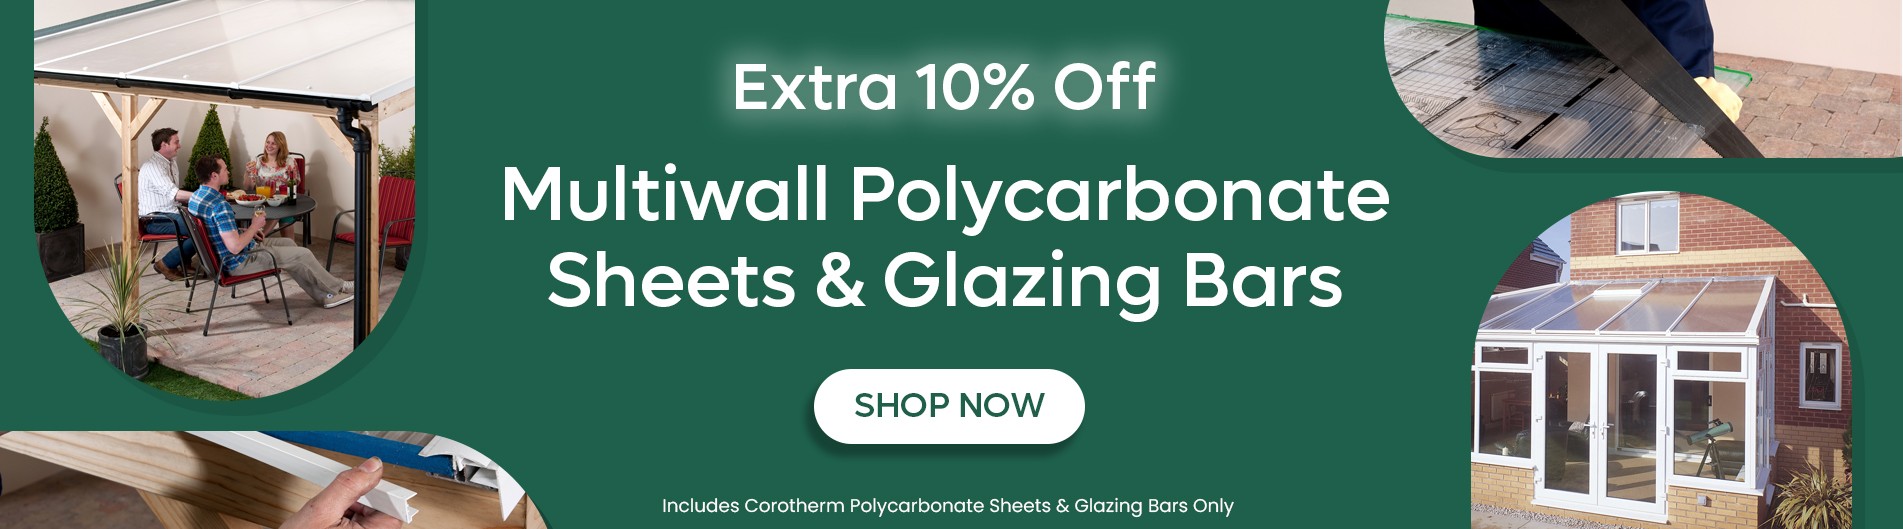 10% Off Multiwall Polycarbonate